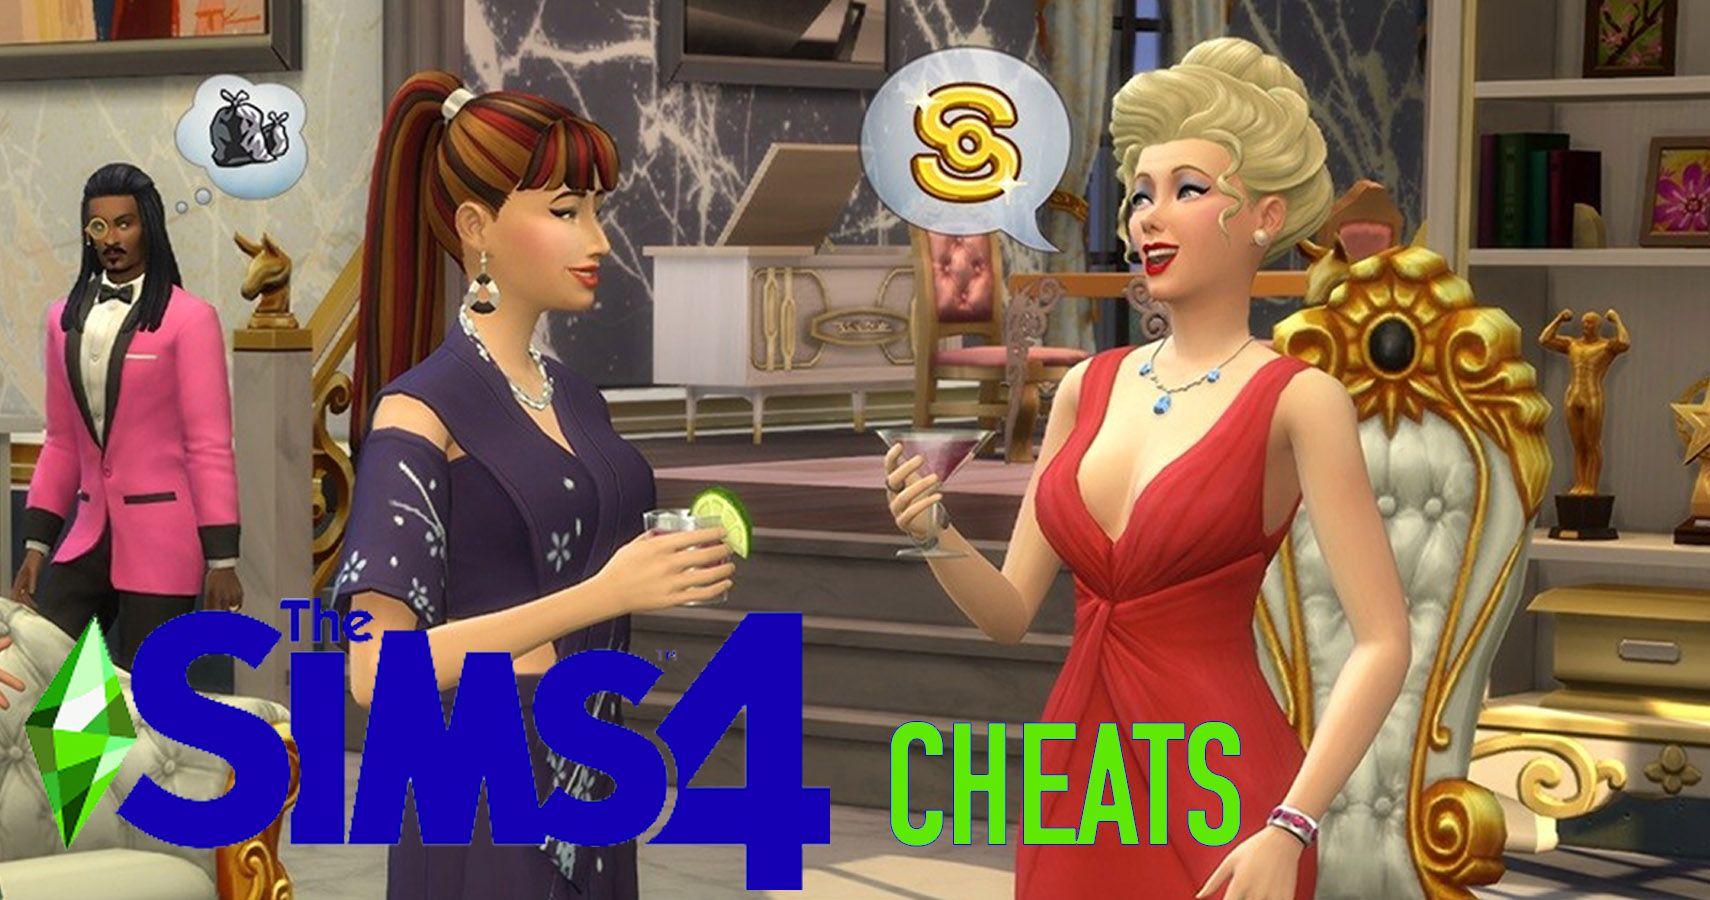 game cheats for the sims